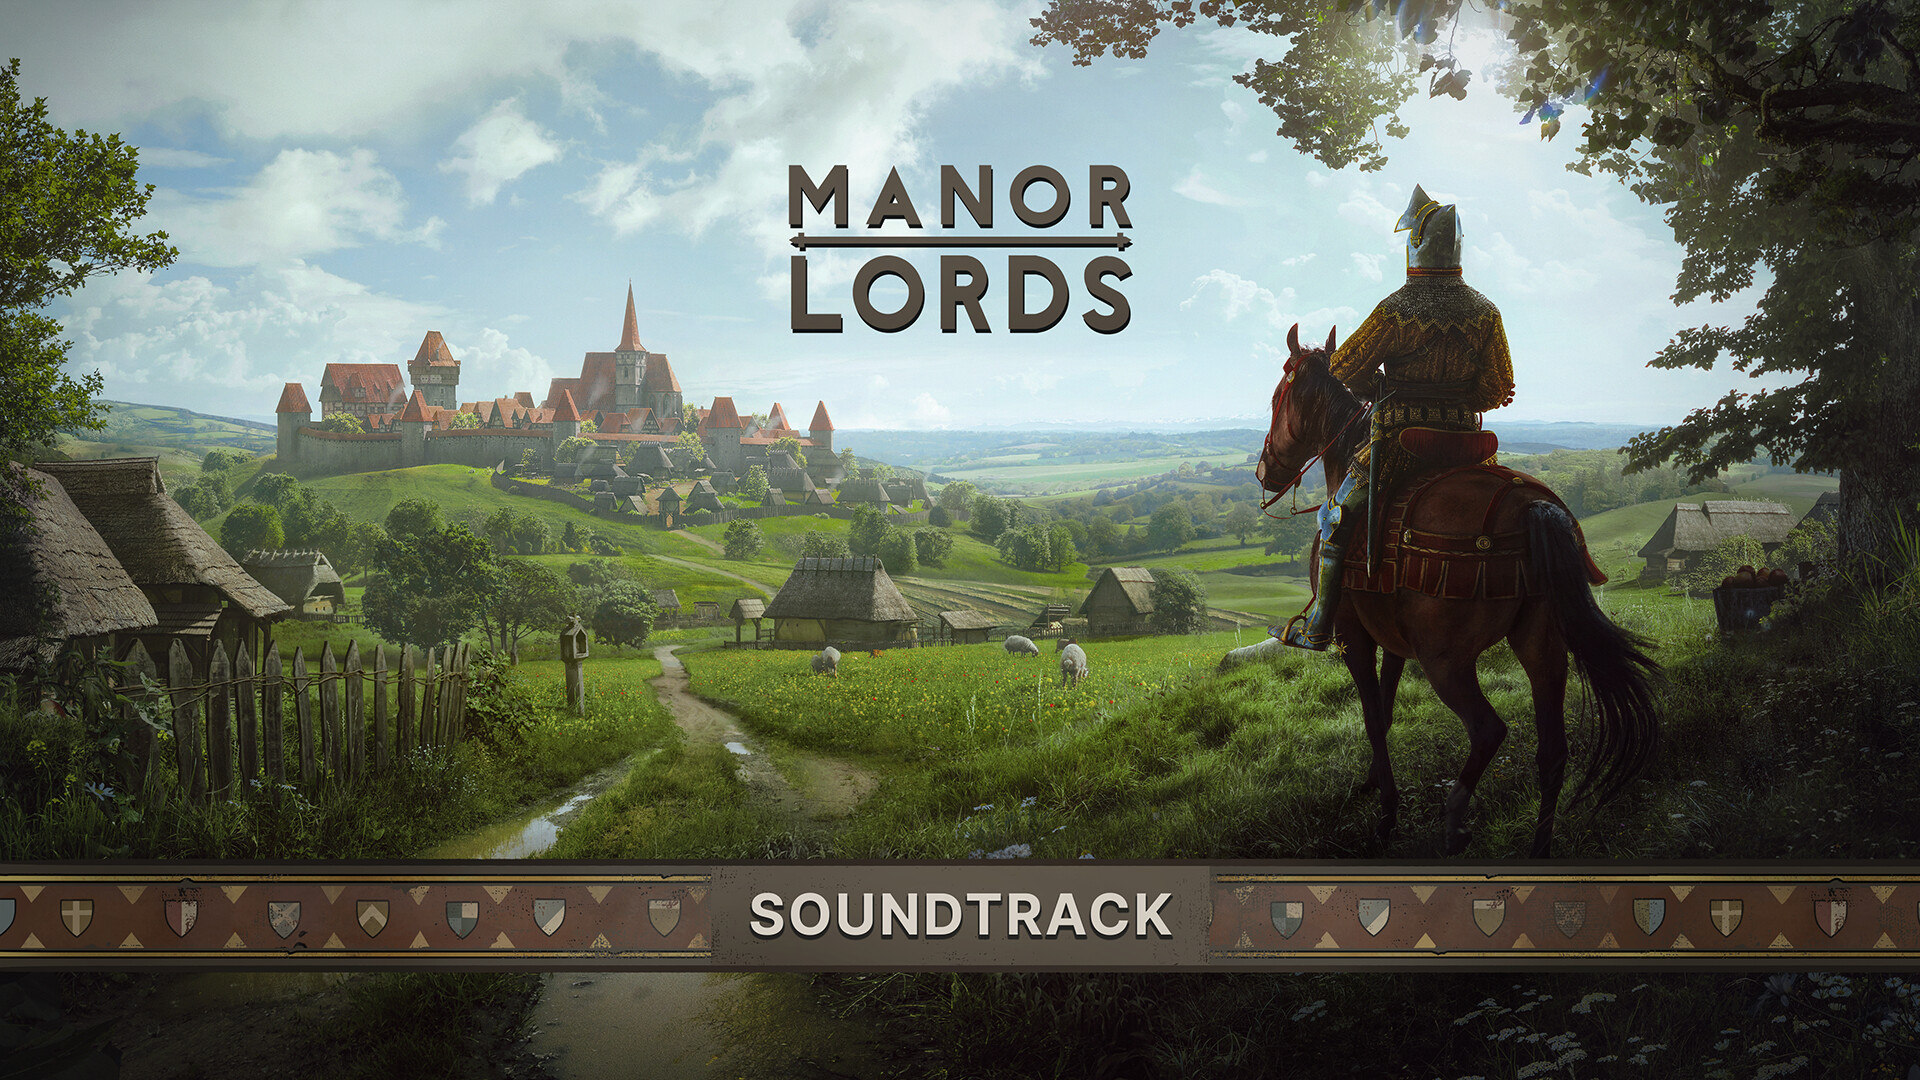 Manor Lords - Soundtrack Featured Screenshot #1